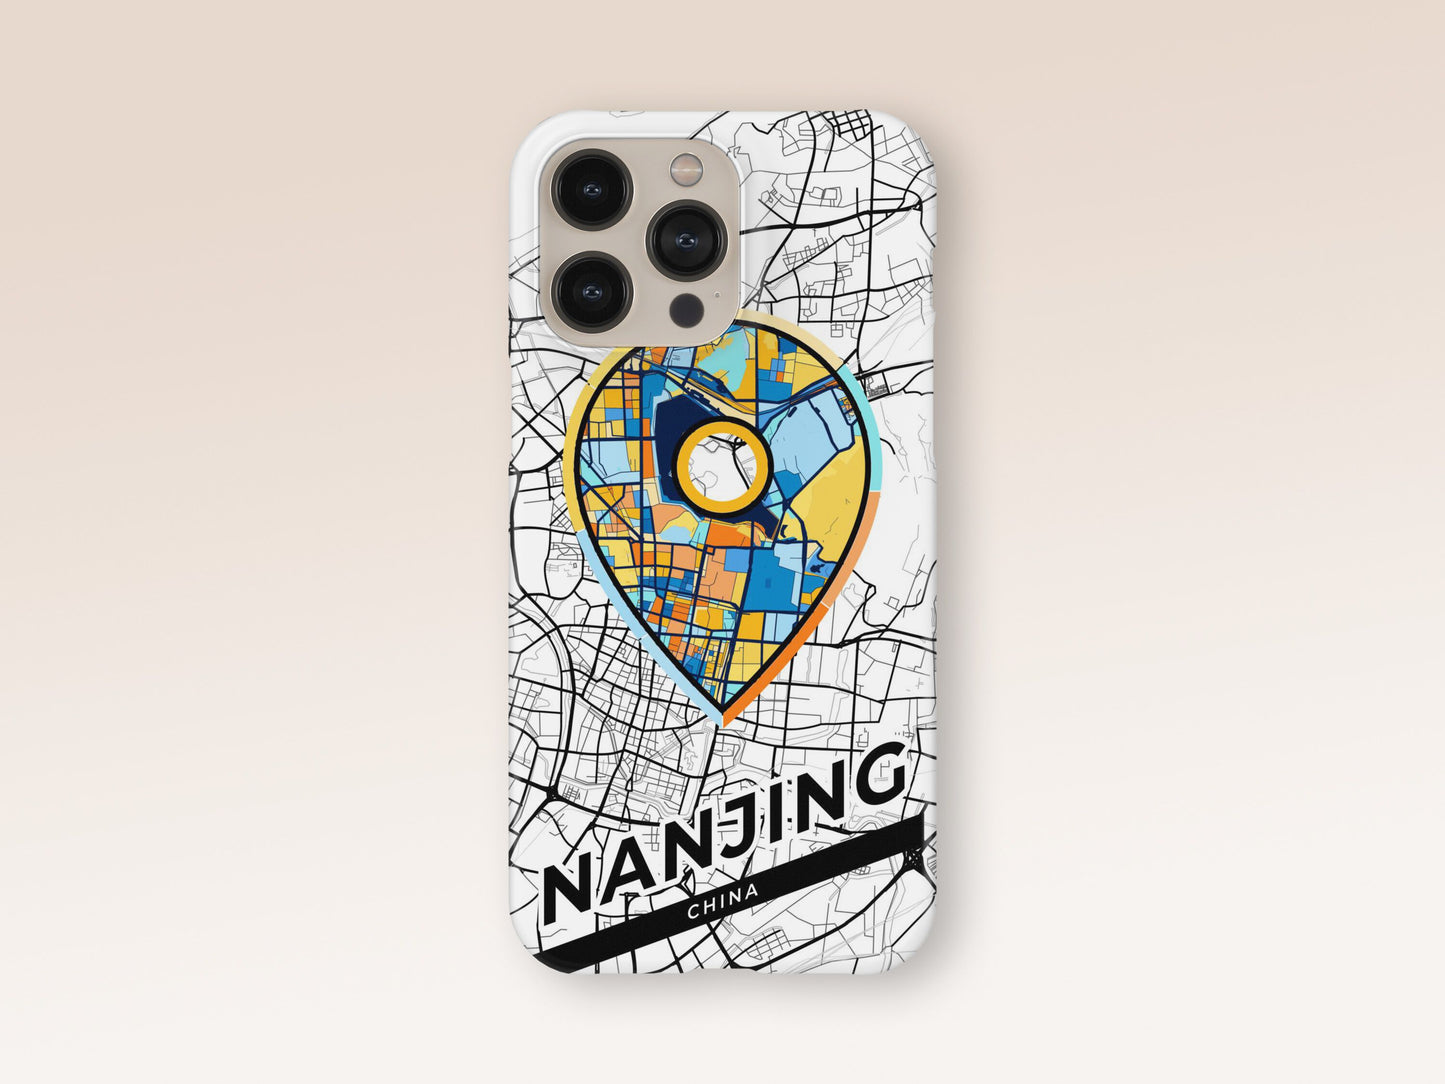 Nanjing China slim phone case with colorful icon. Birthday, wedding or housewarming gift. Couple match cases. 1